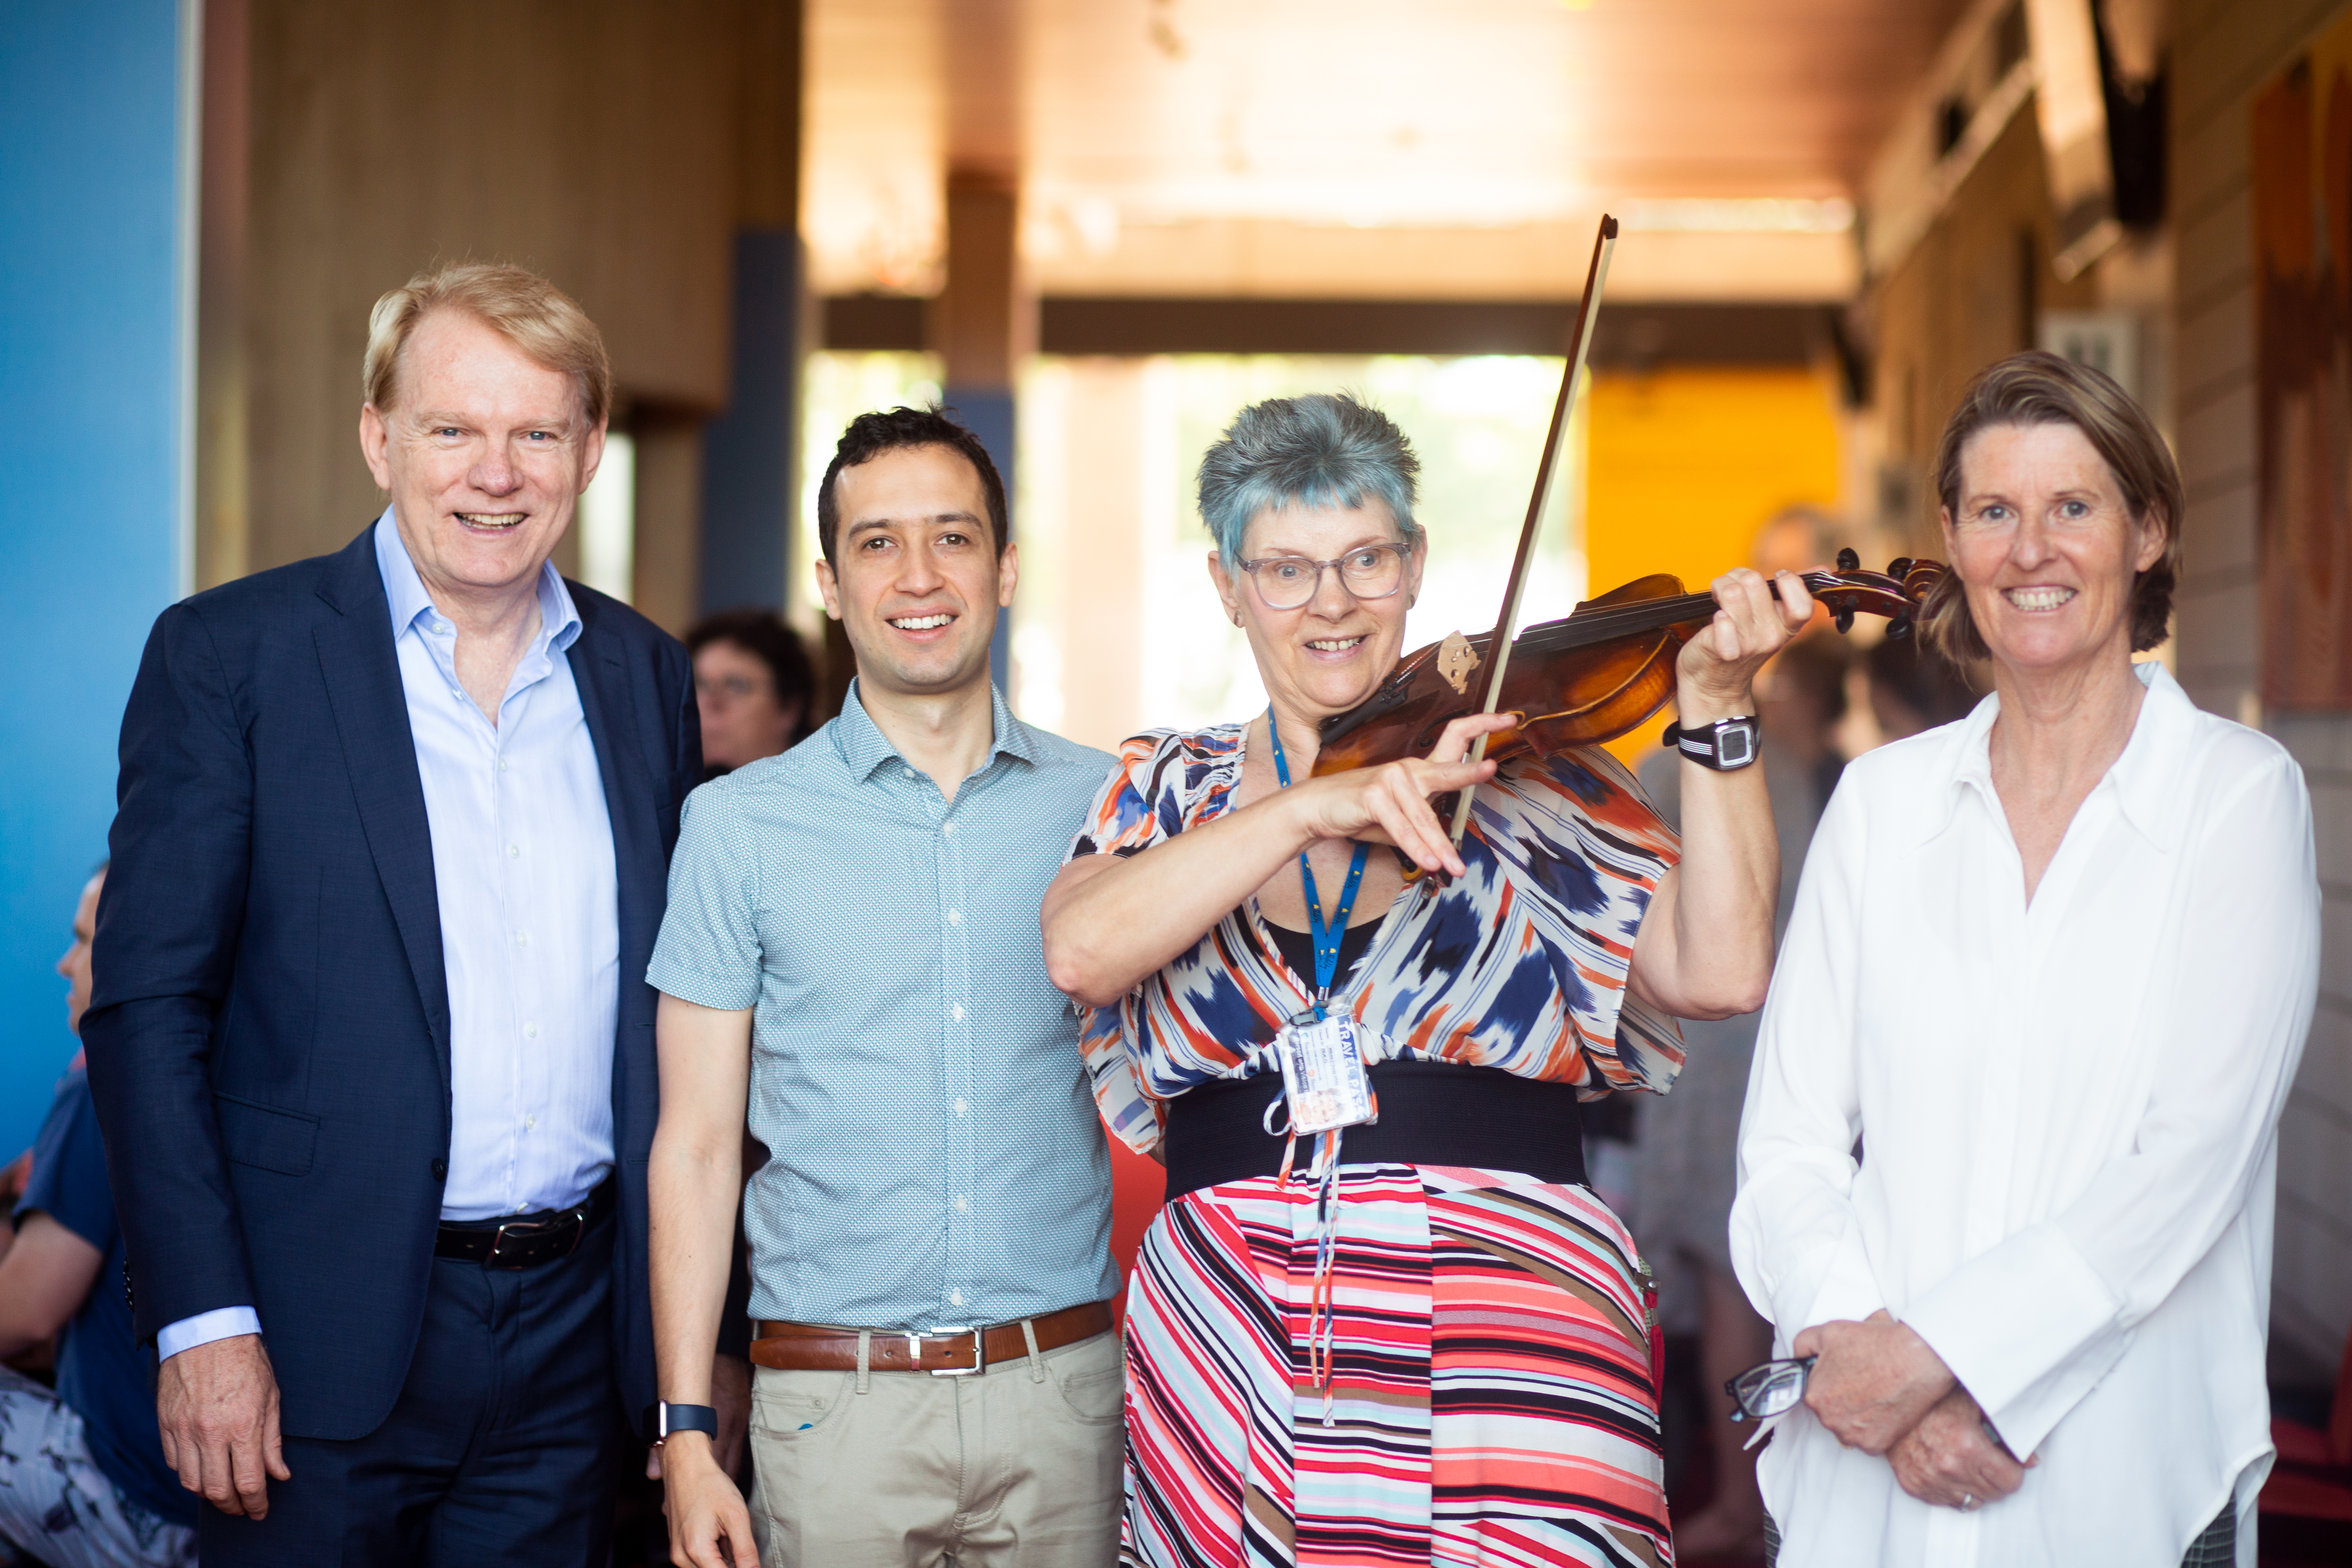 CEO of WASO Mark Coughlan, violinist, Wilma and a WASO staff member standing together, Wilma is playing the violin. Photos by Alanna Kusin, WASO.